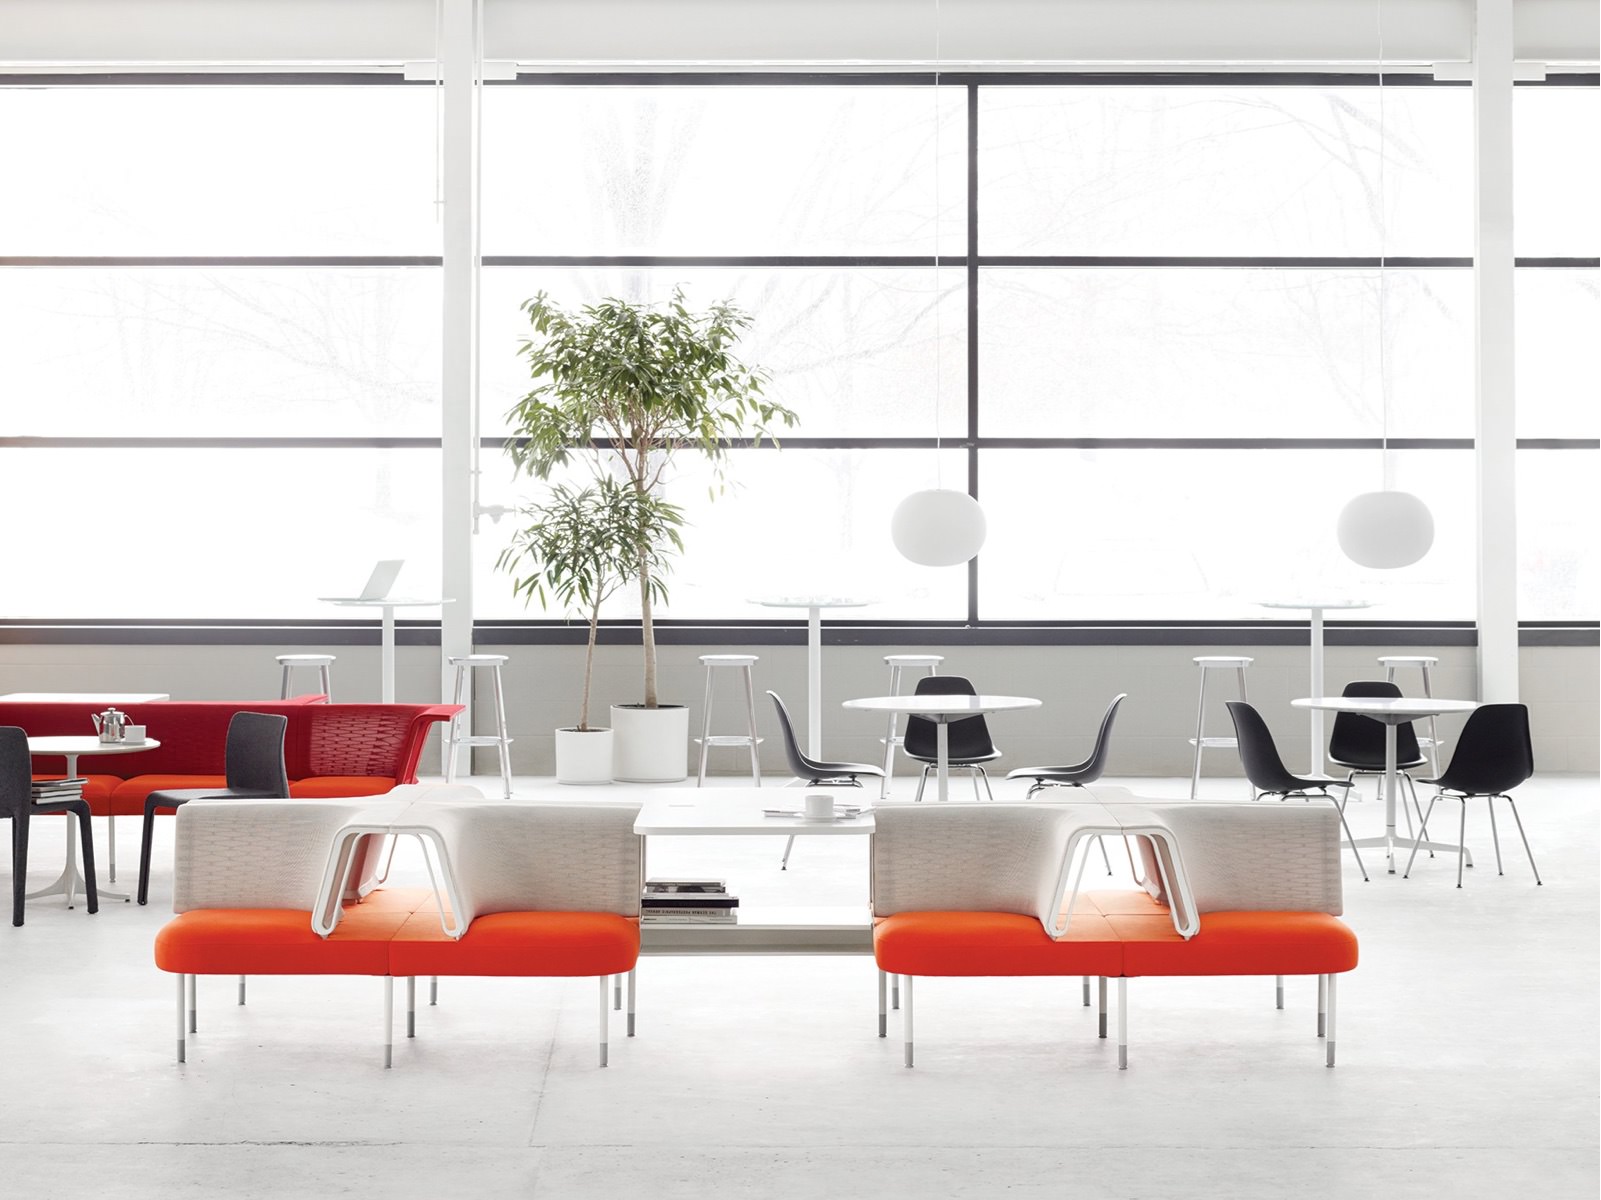 A gathering space with multiple interaction areas, including round tables, a counter, and Public Office Landscape social chairs in red, white, and orange.